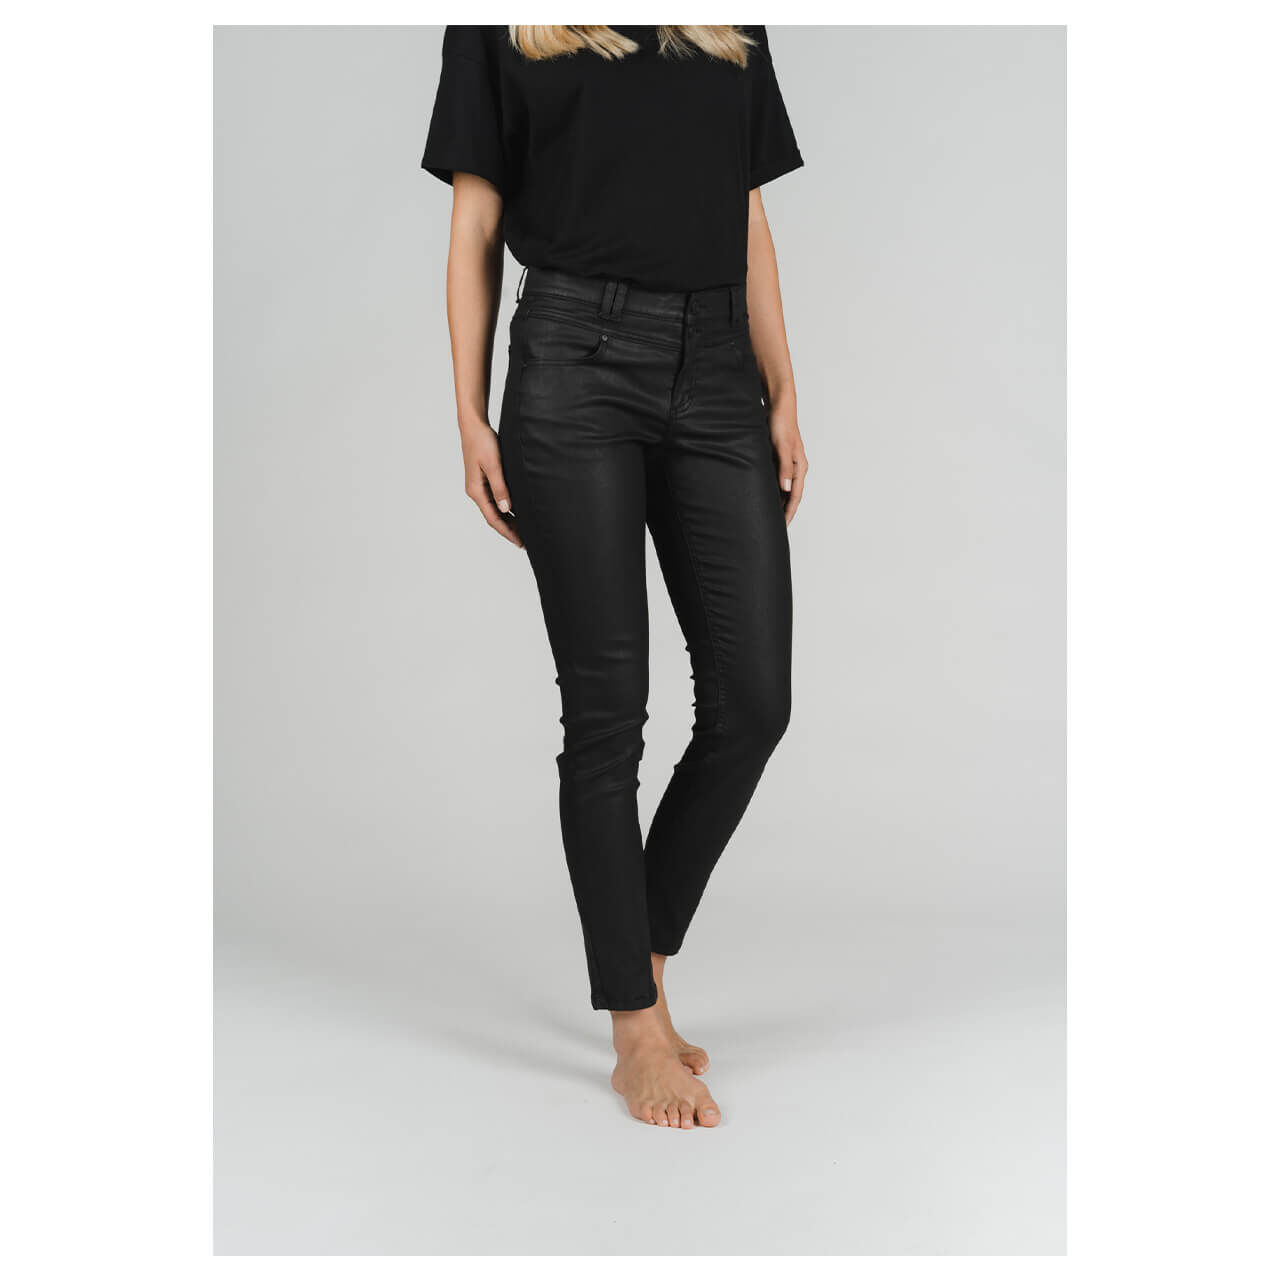 Angels Skinny Button Jeans shiny black coated